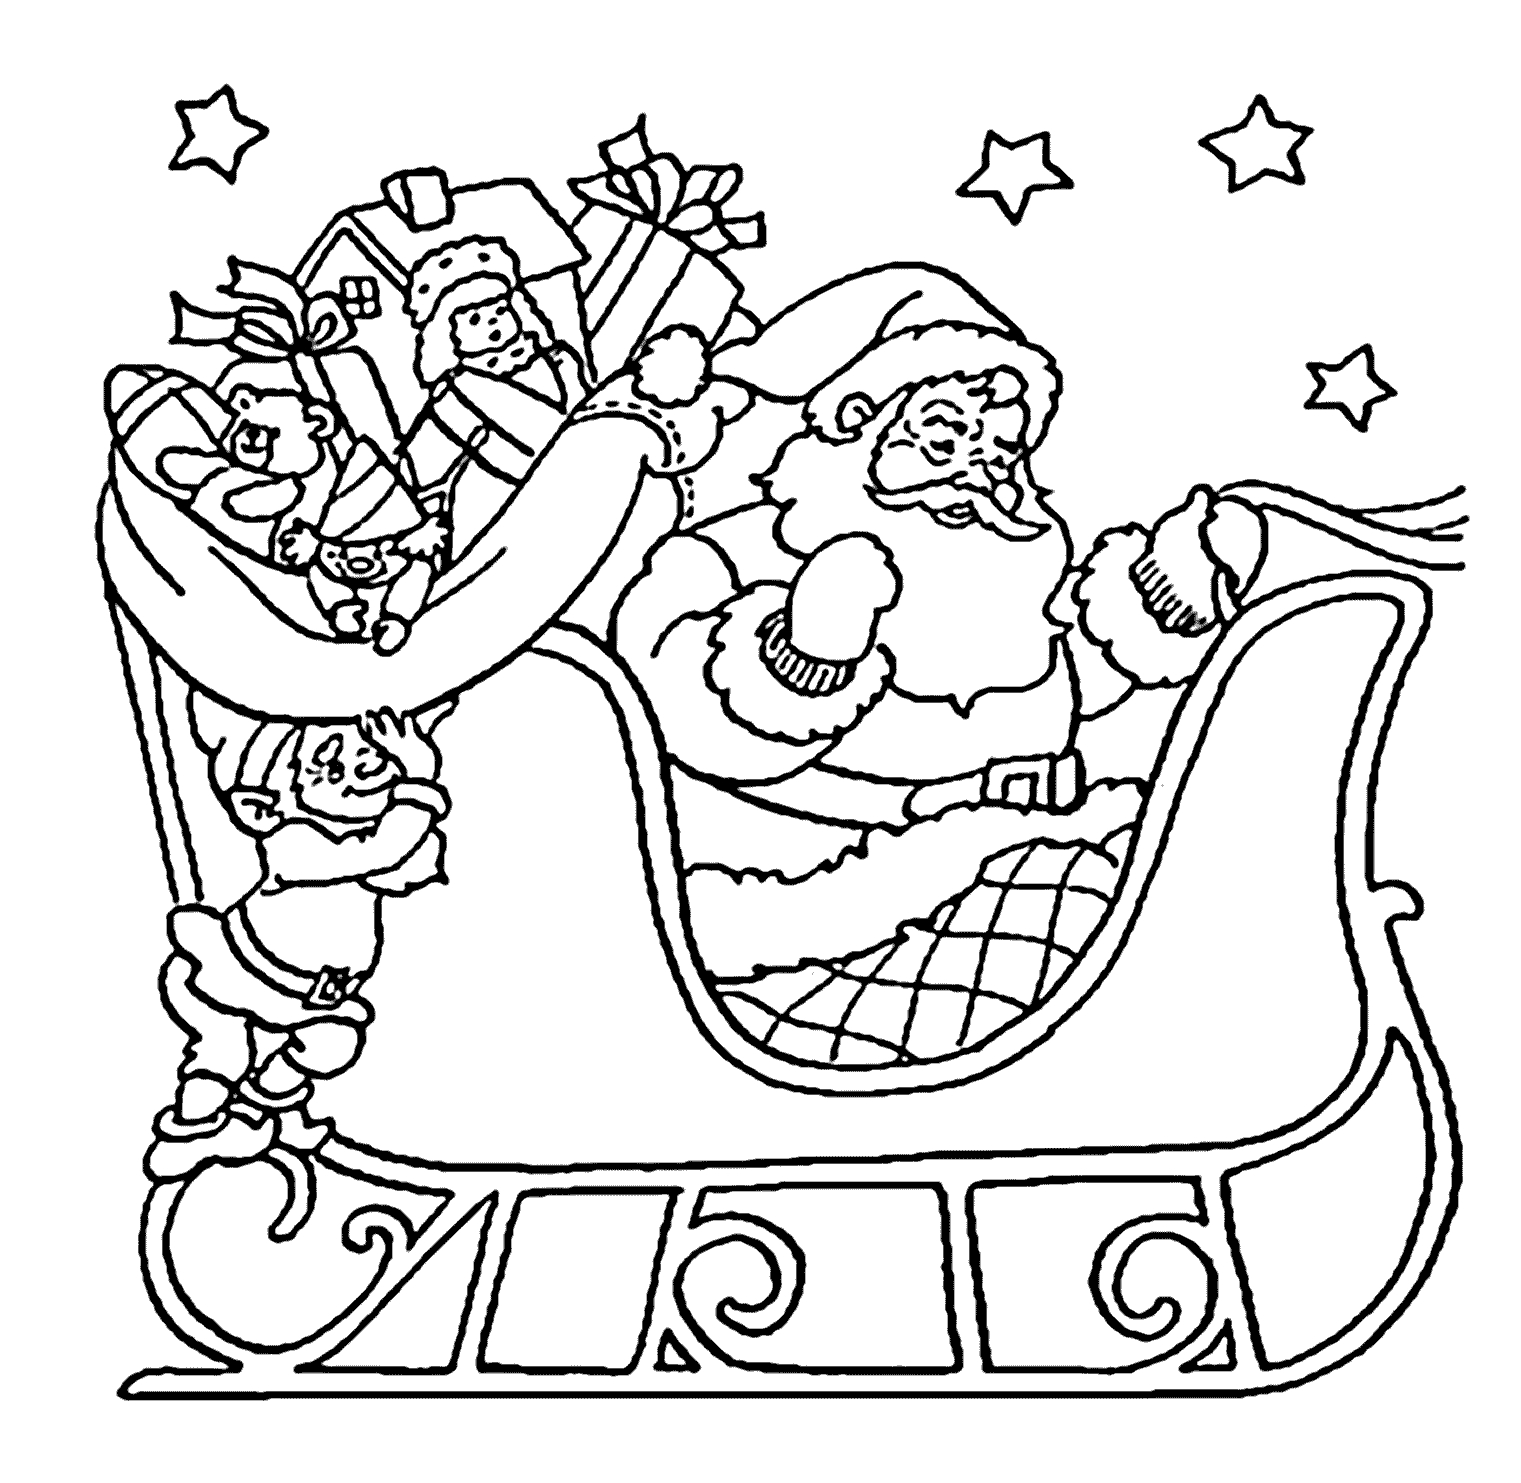 Coloring Pages Santa Santa Coloring Pages Best Coloring Pages For Kids